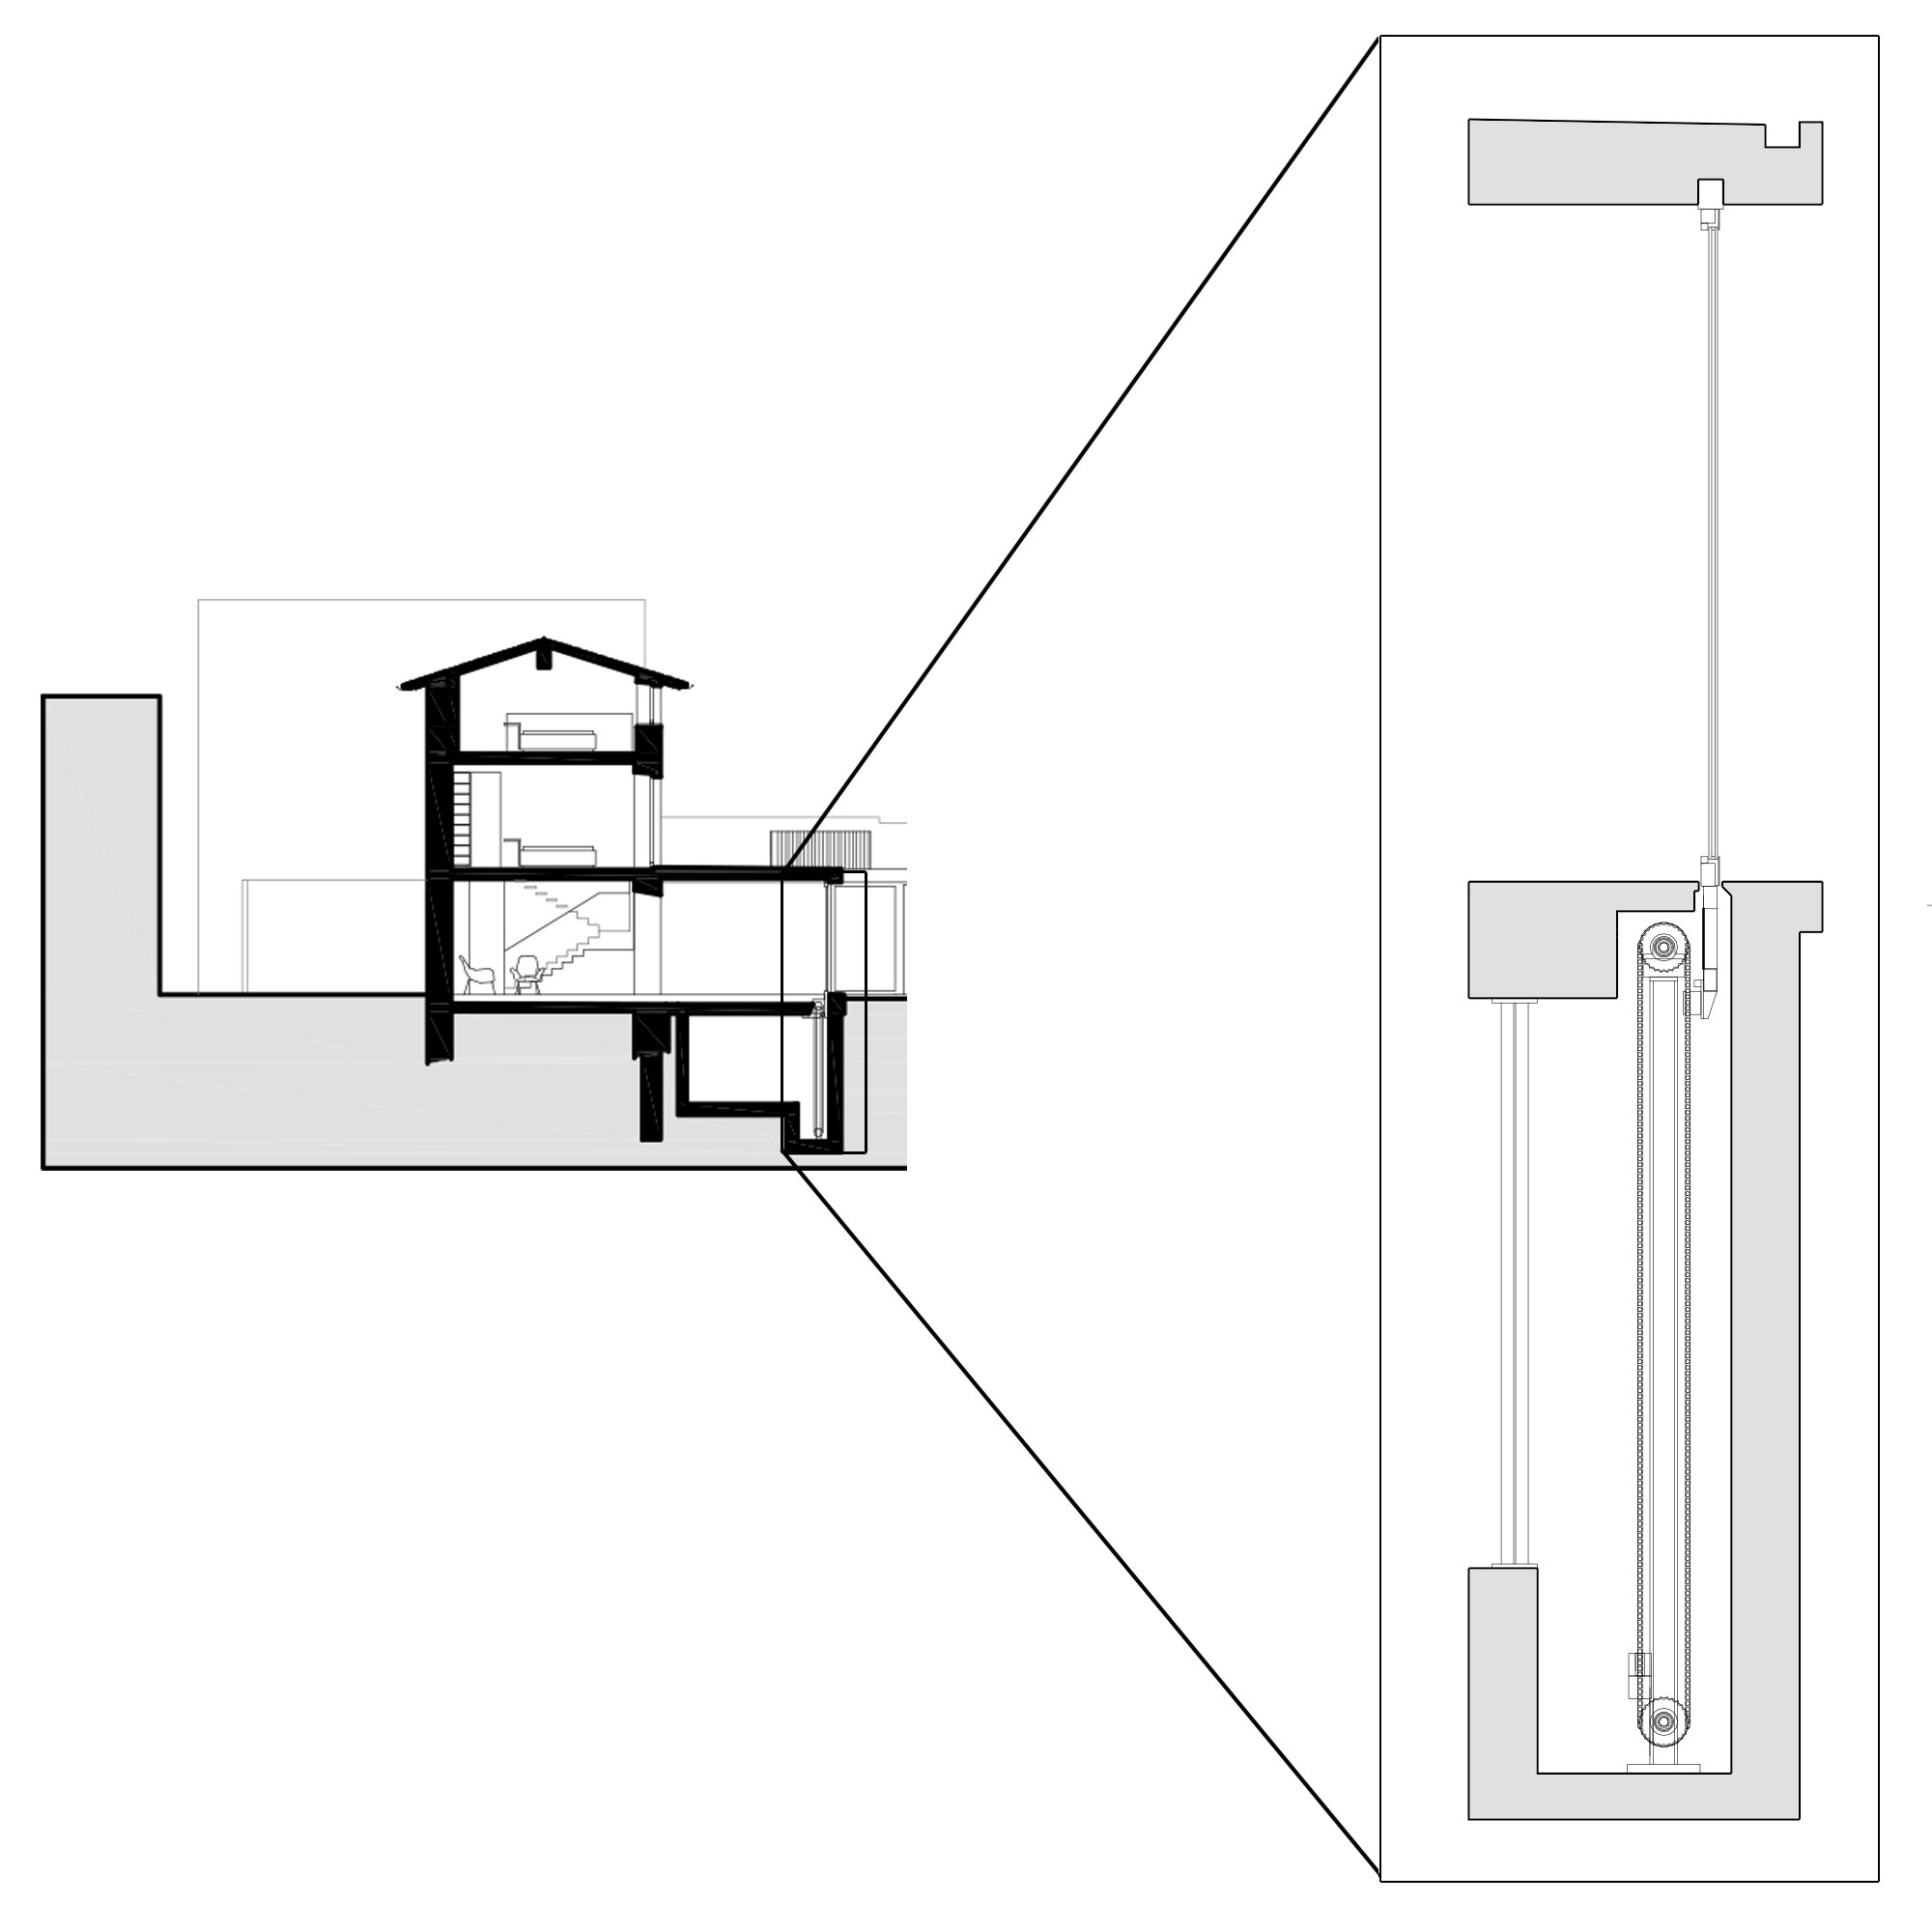 Door Architecture Symbol & Includes The Following CAD